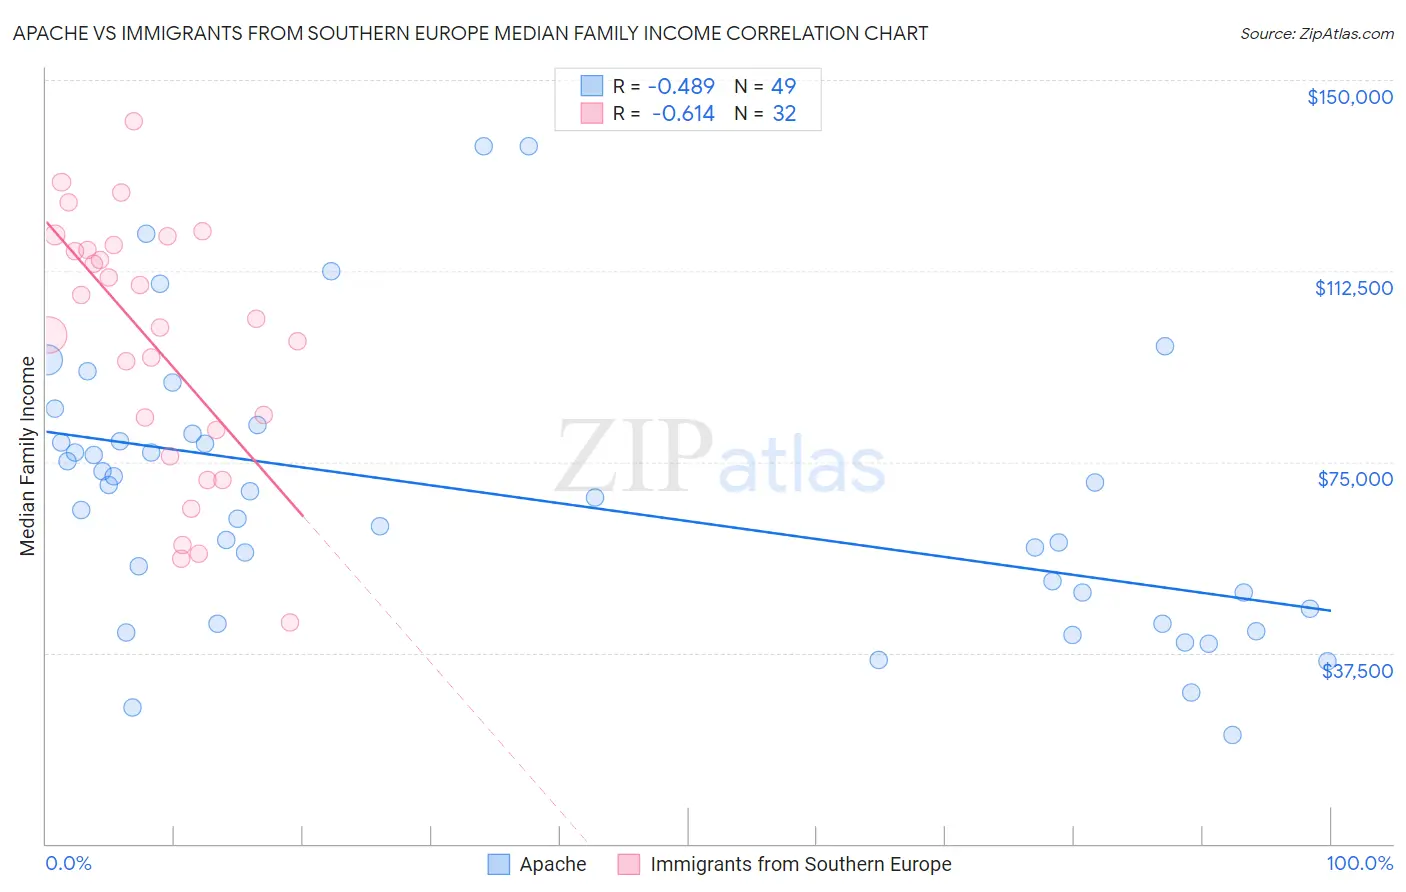 Apache vs Immigrants from Southern Europe Median Family Income